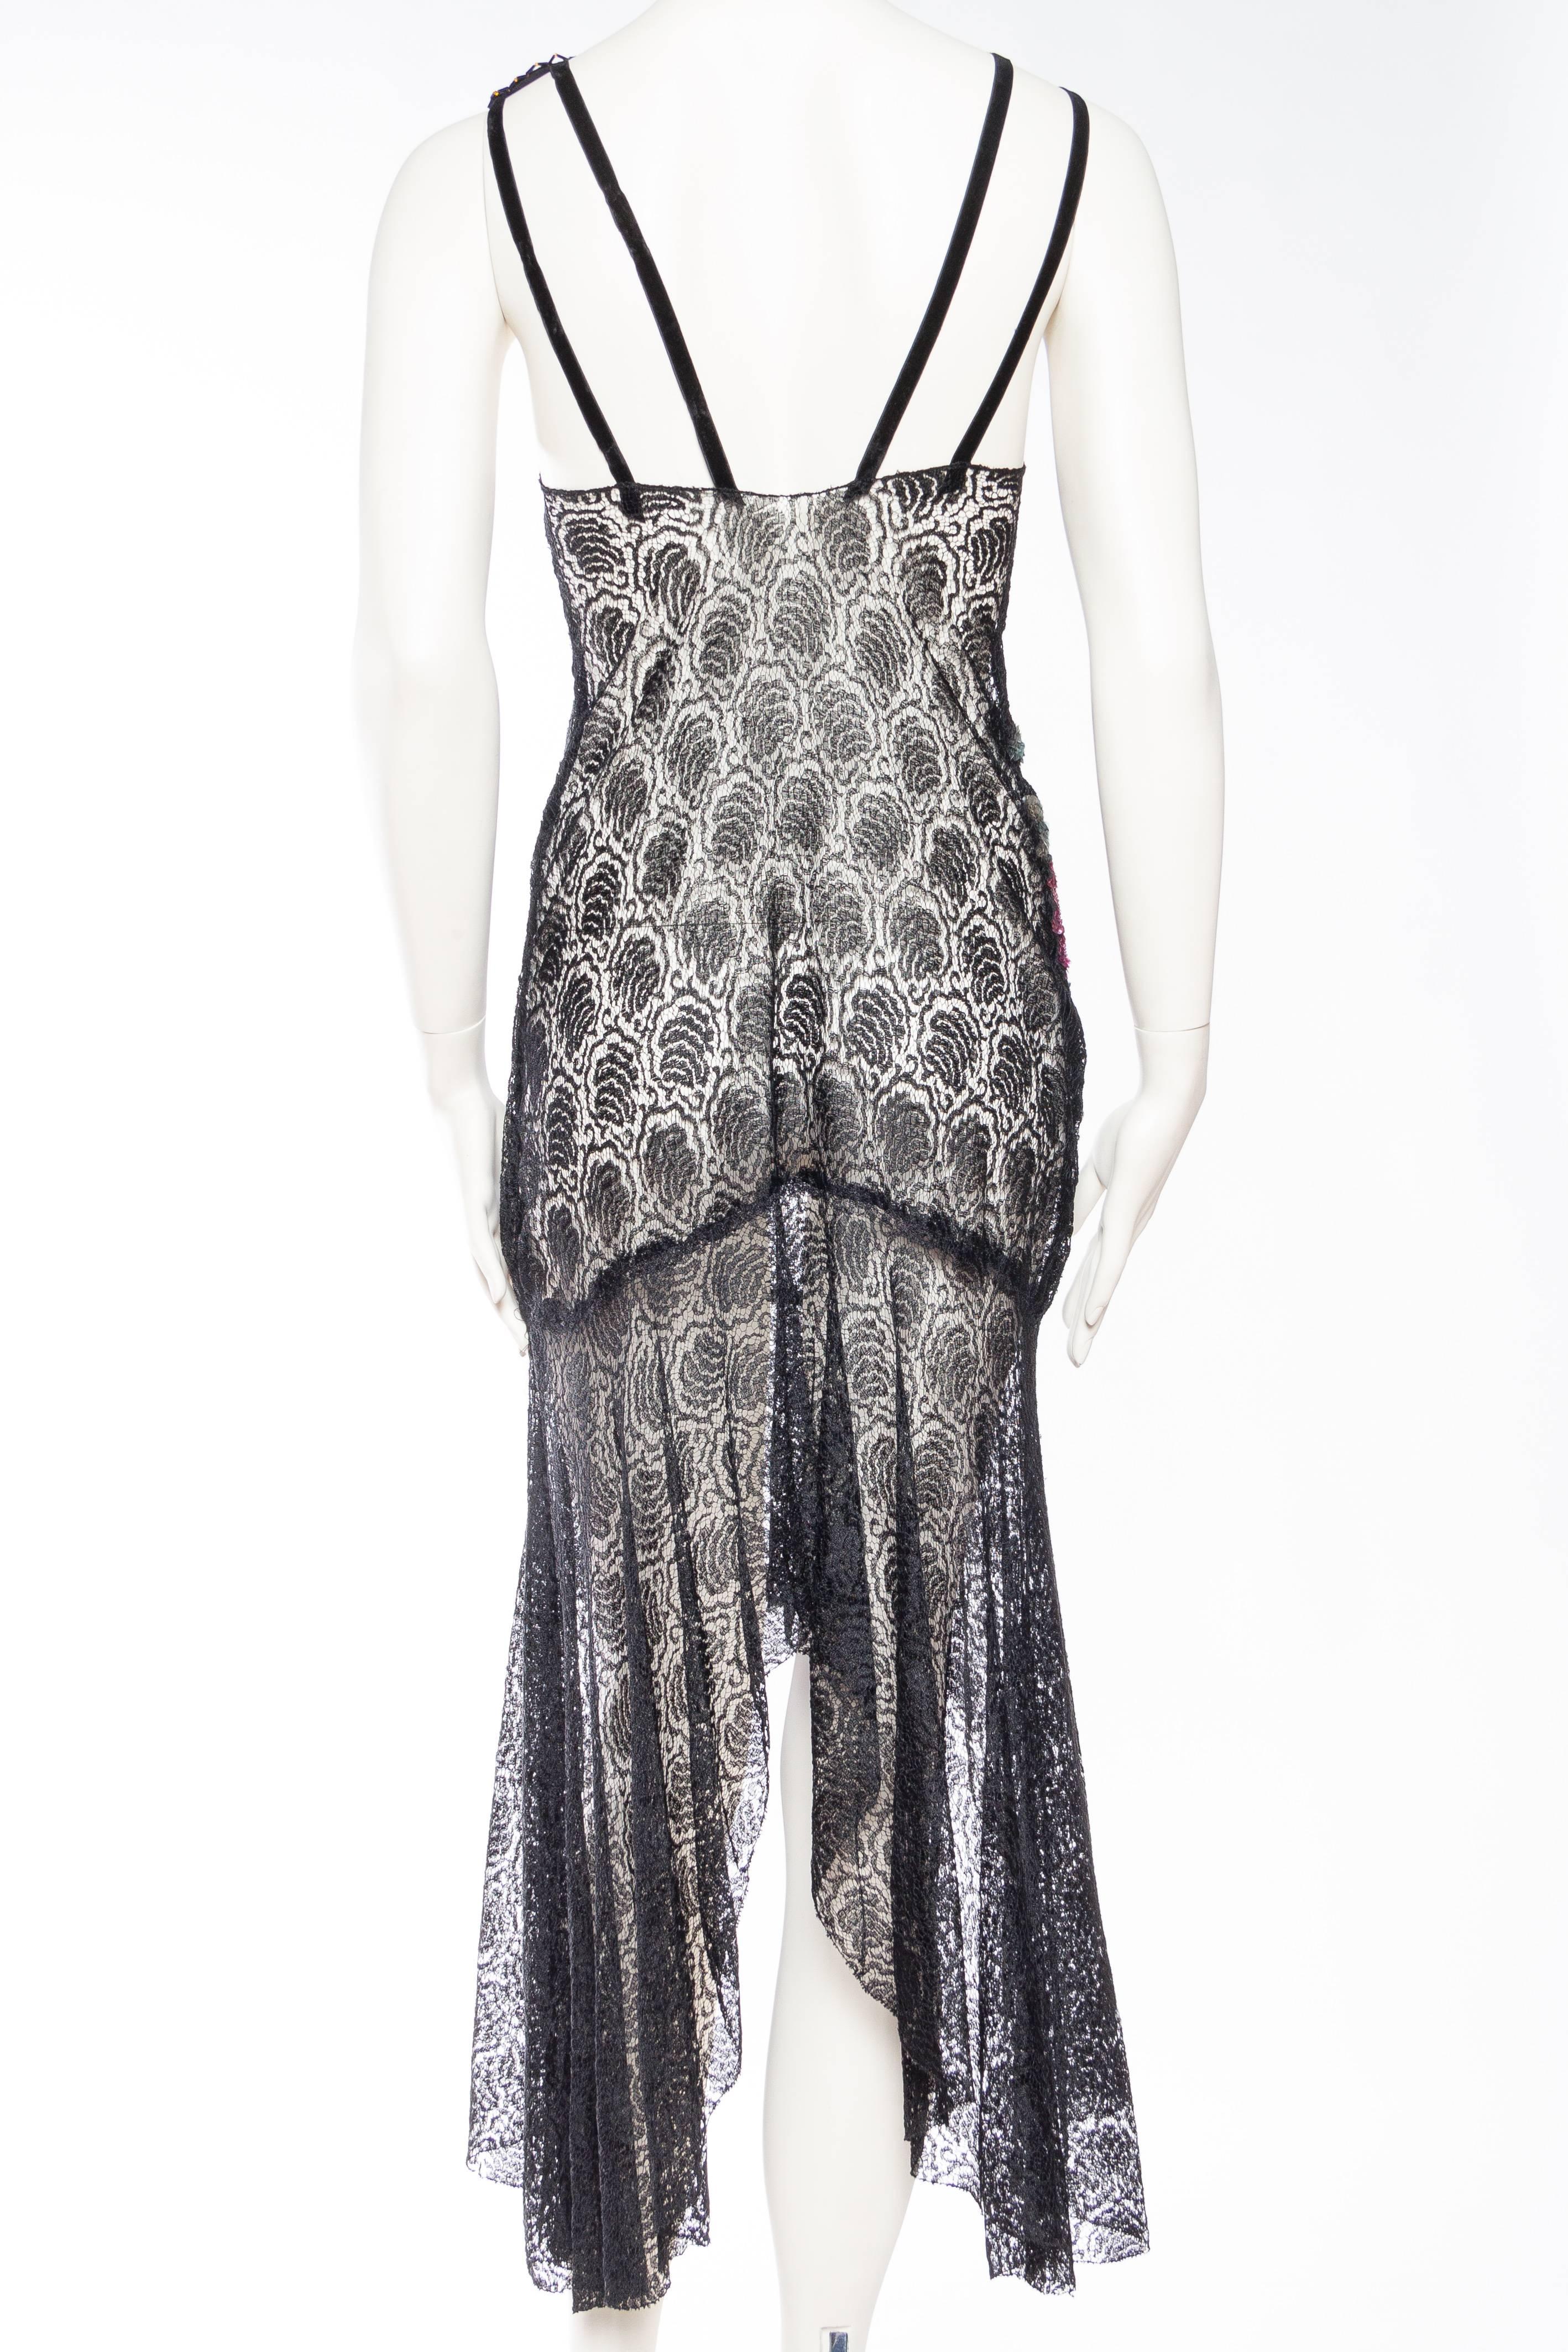 Reworked 1930s Sheer Lace Dress with Sequined Bird 2